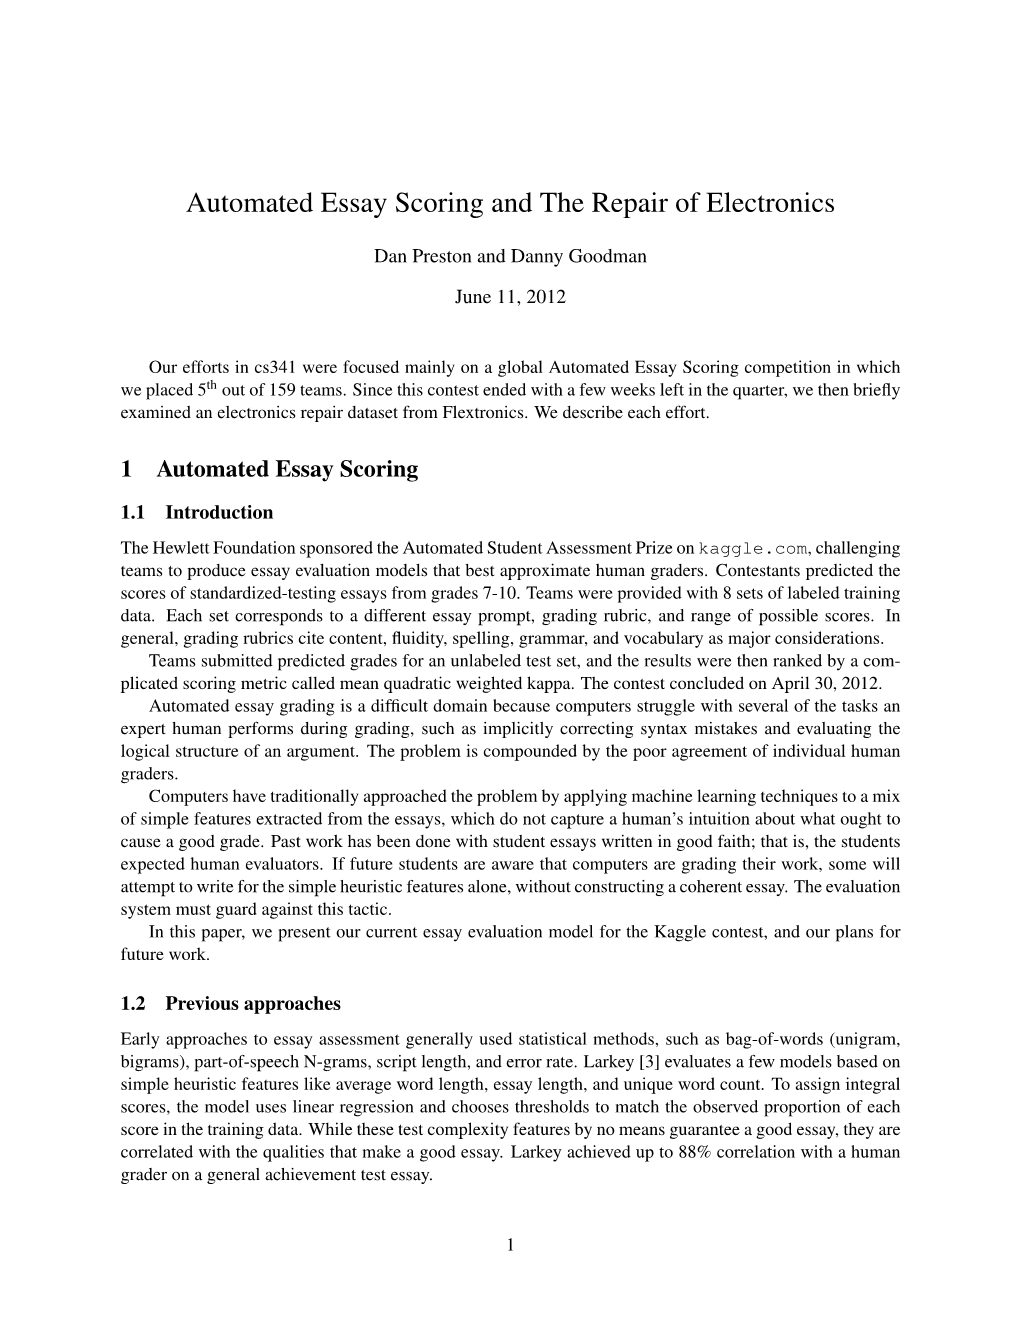 Automated Essay Scoring and the Repair of Electronics